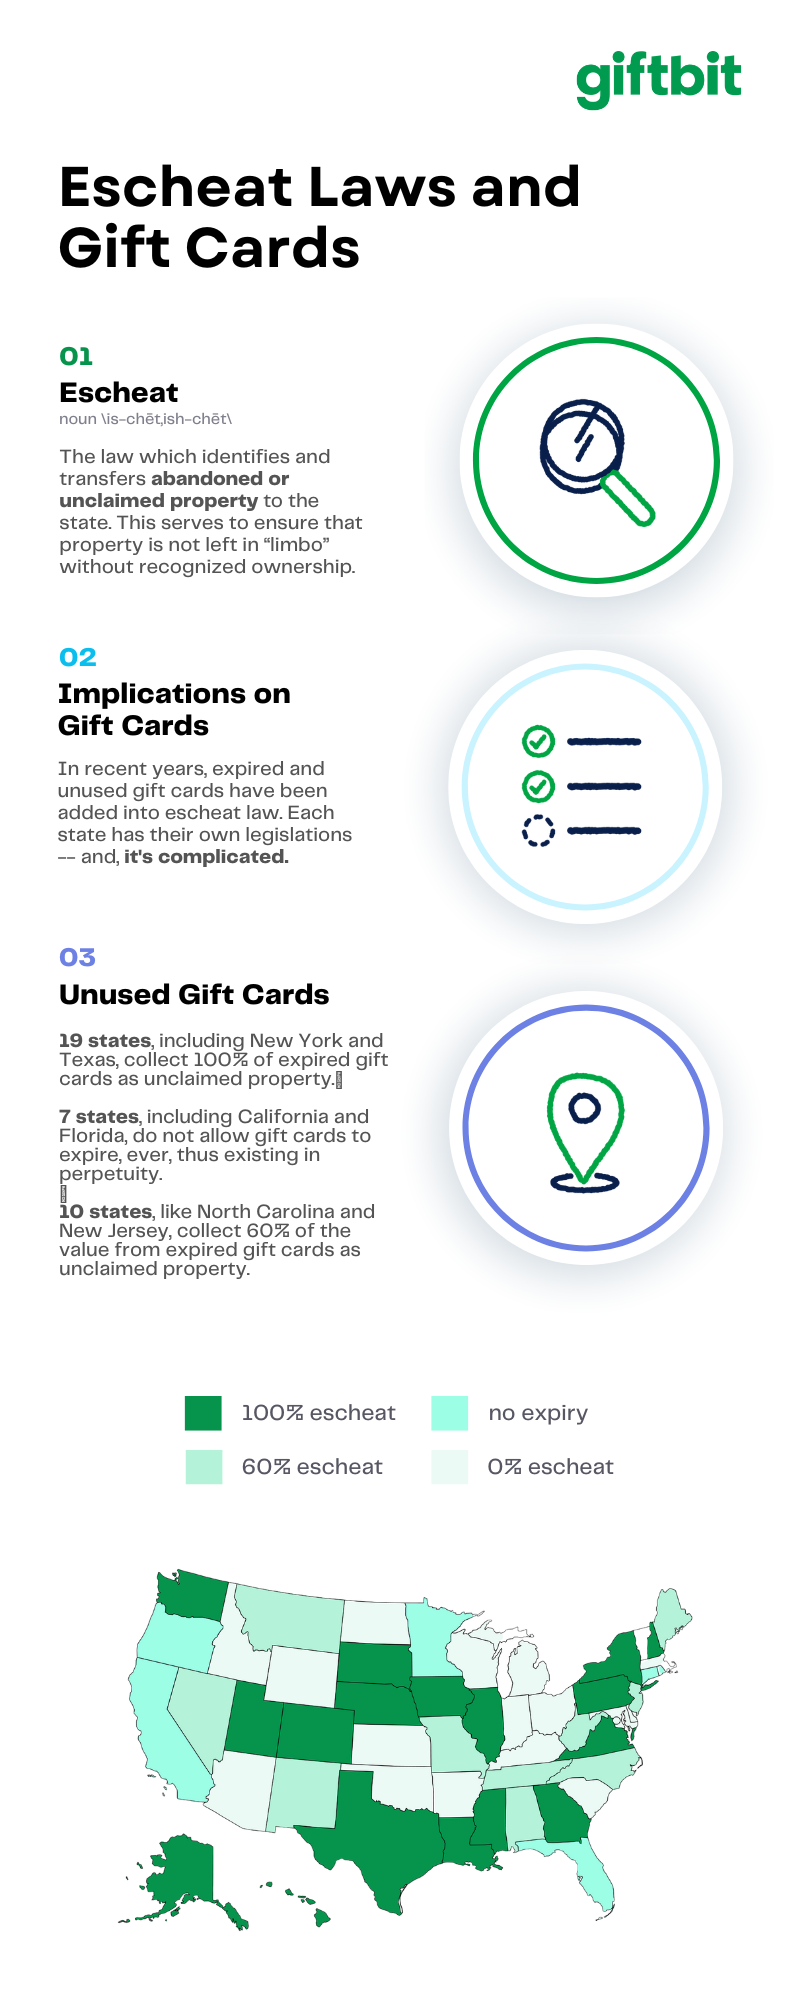 OPT Blog Image - Escheat Laws and Gift Cards (refreshed)